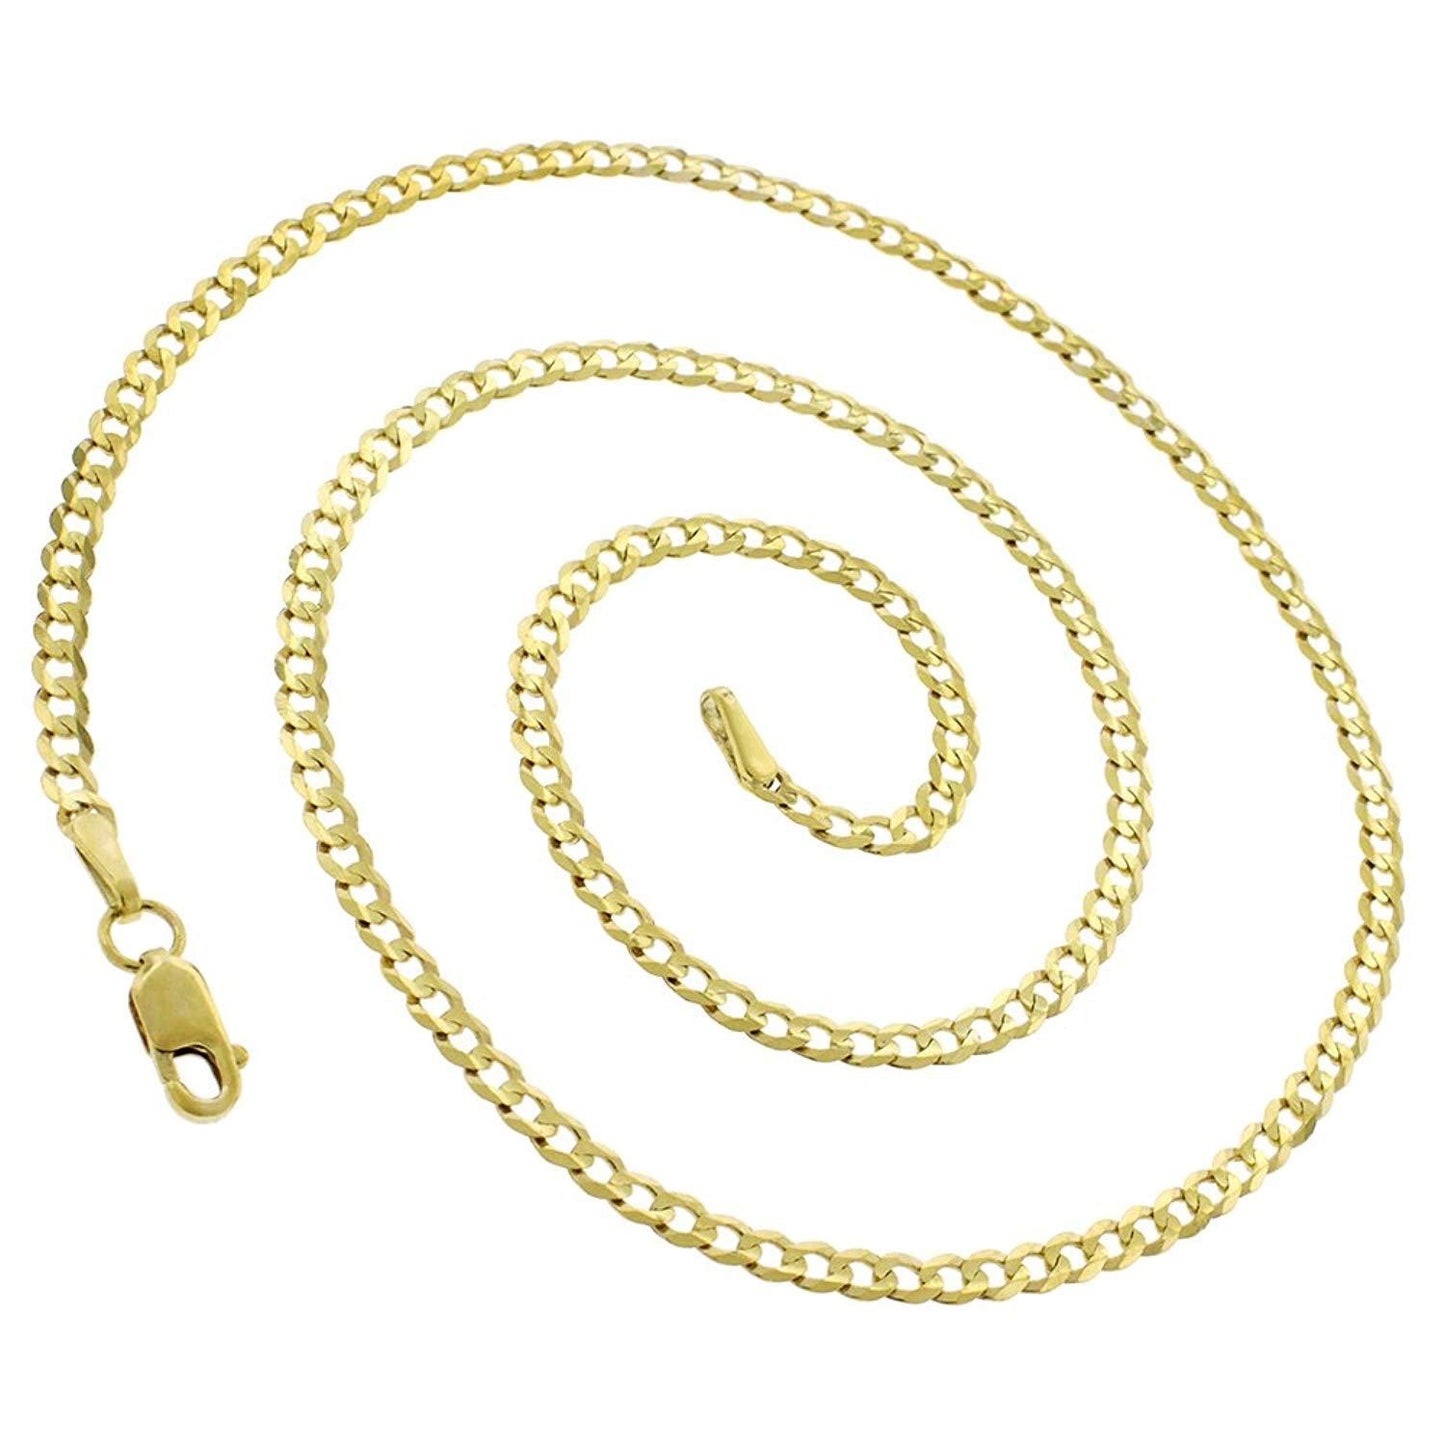 Men Women Fine Jewelry-10K Yellow Gold Solid Cuban Curb Link Necklace Chains